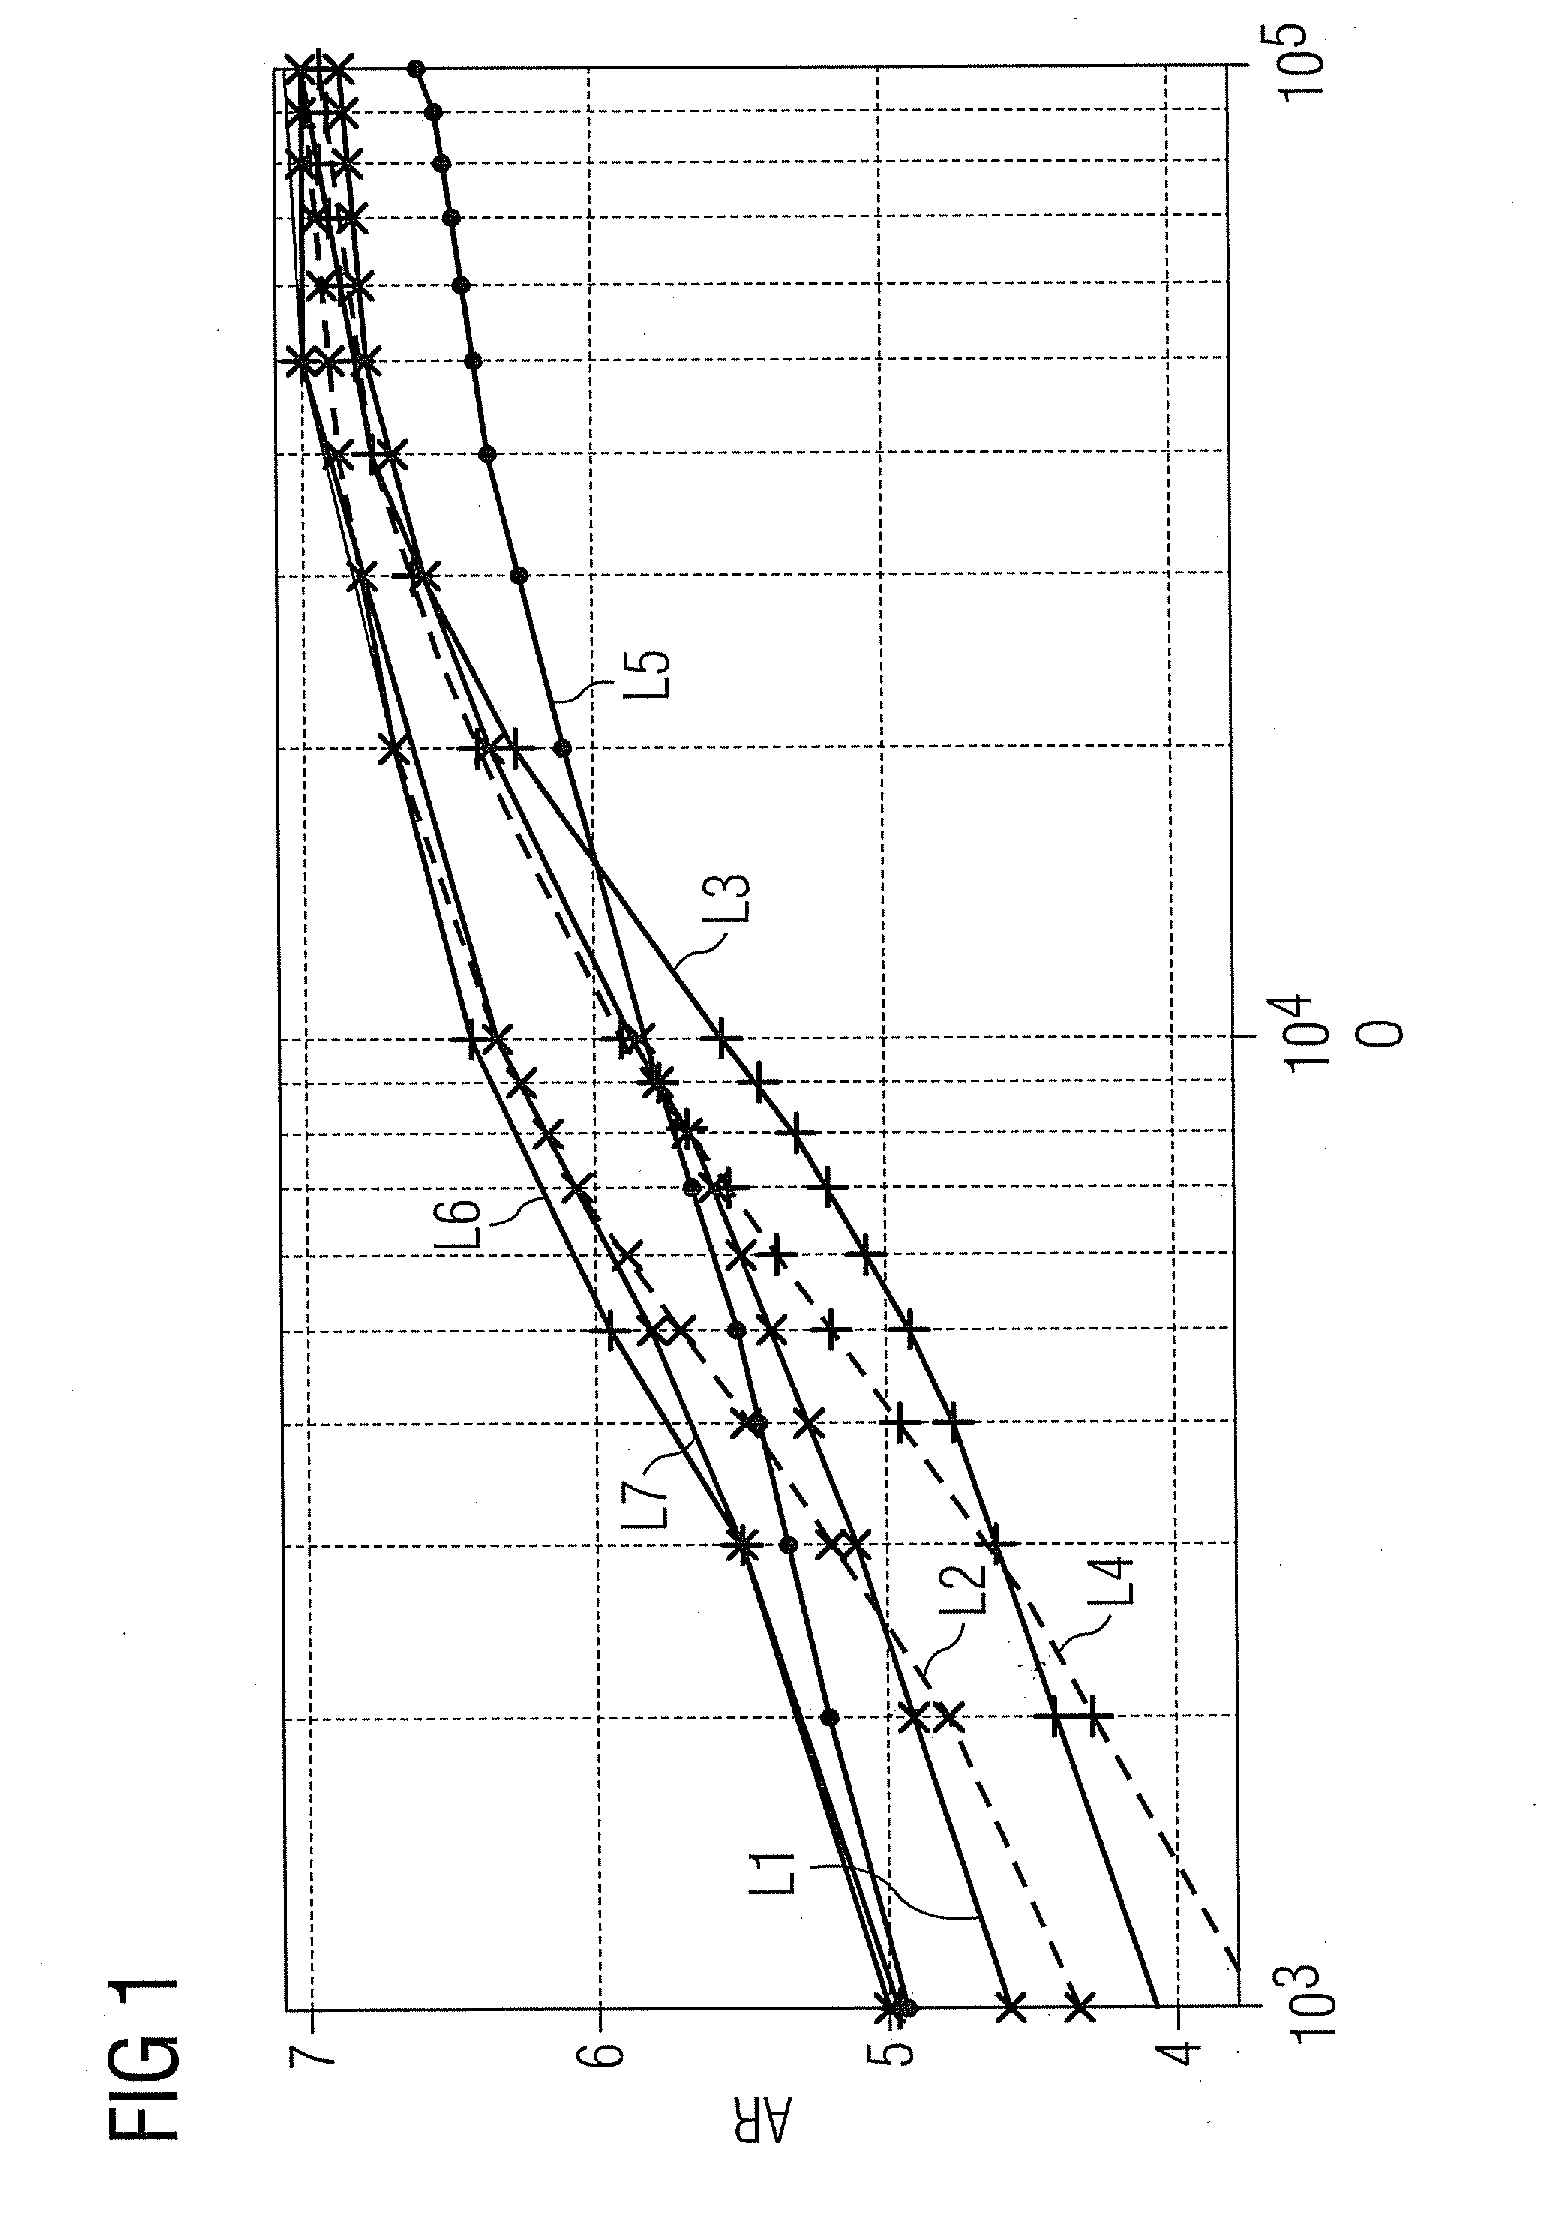 Method for the computer-assisted learning of a control and/or a feedback control of a technical system